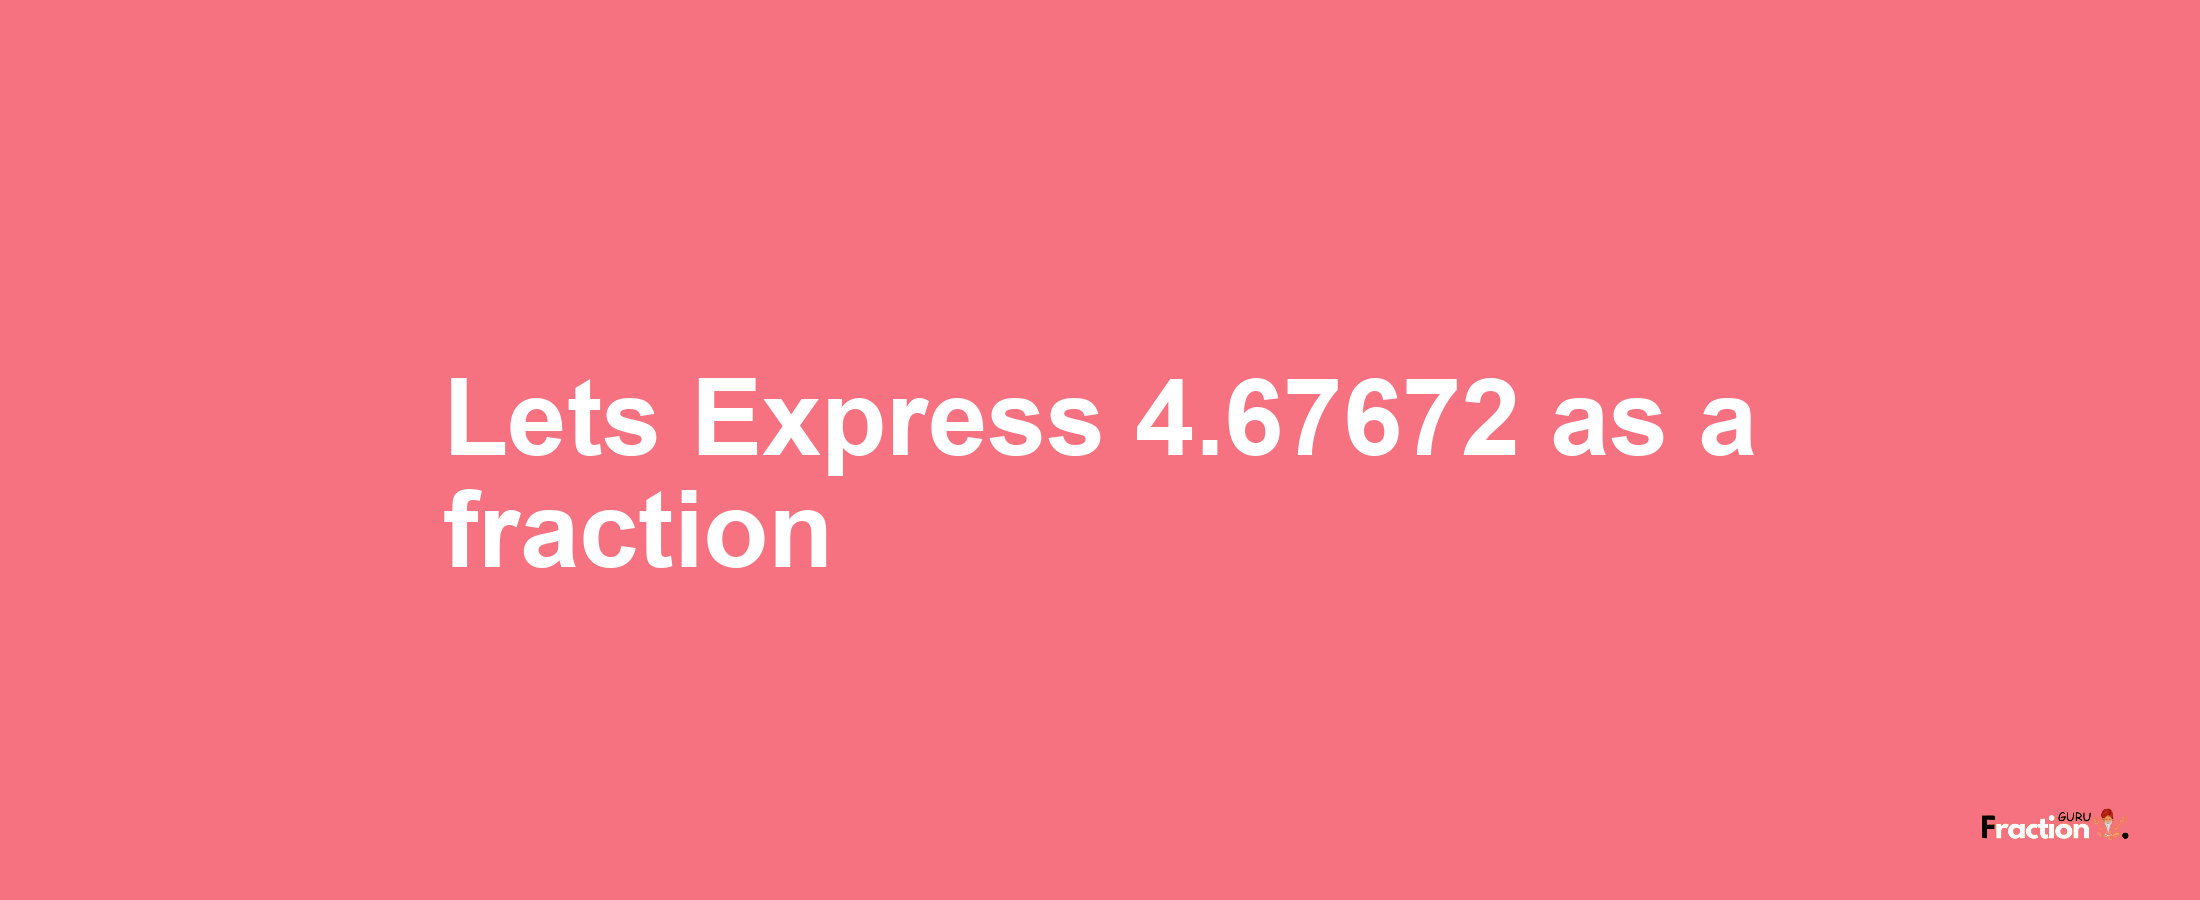 Lets Express 4.67672 as afraction